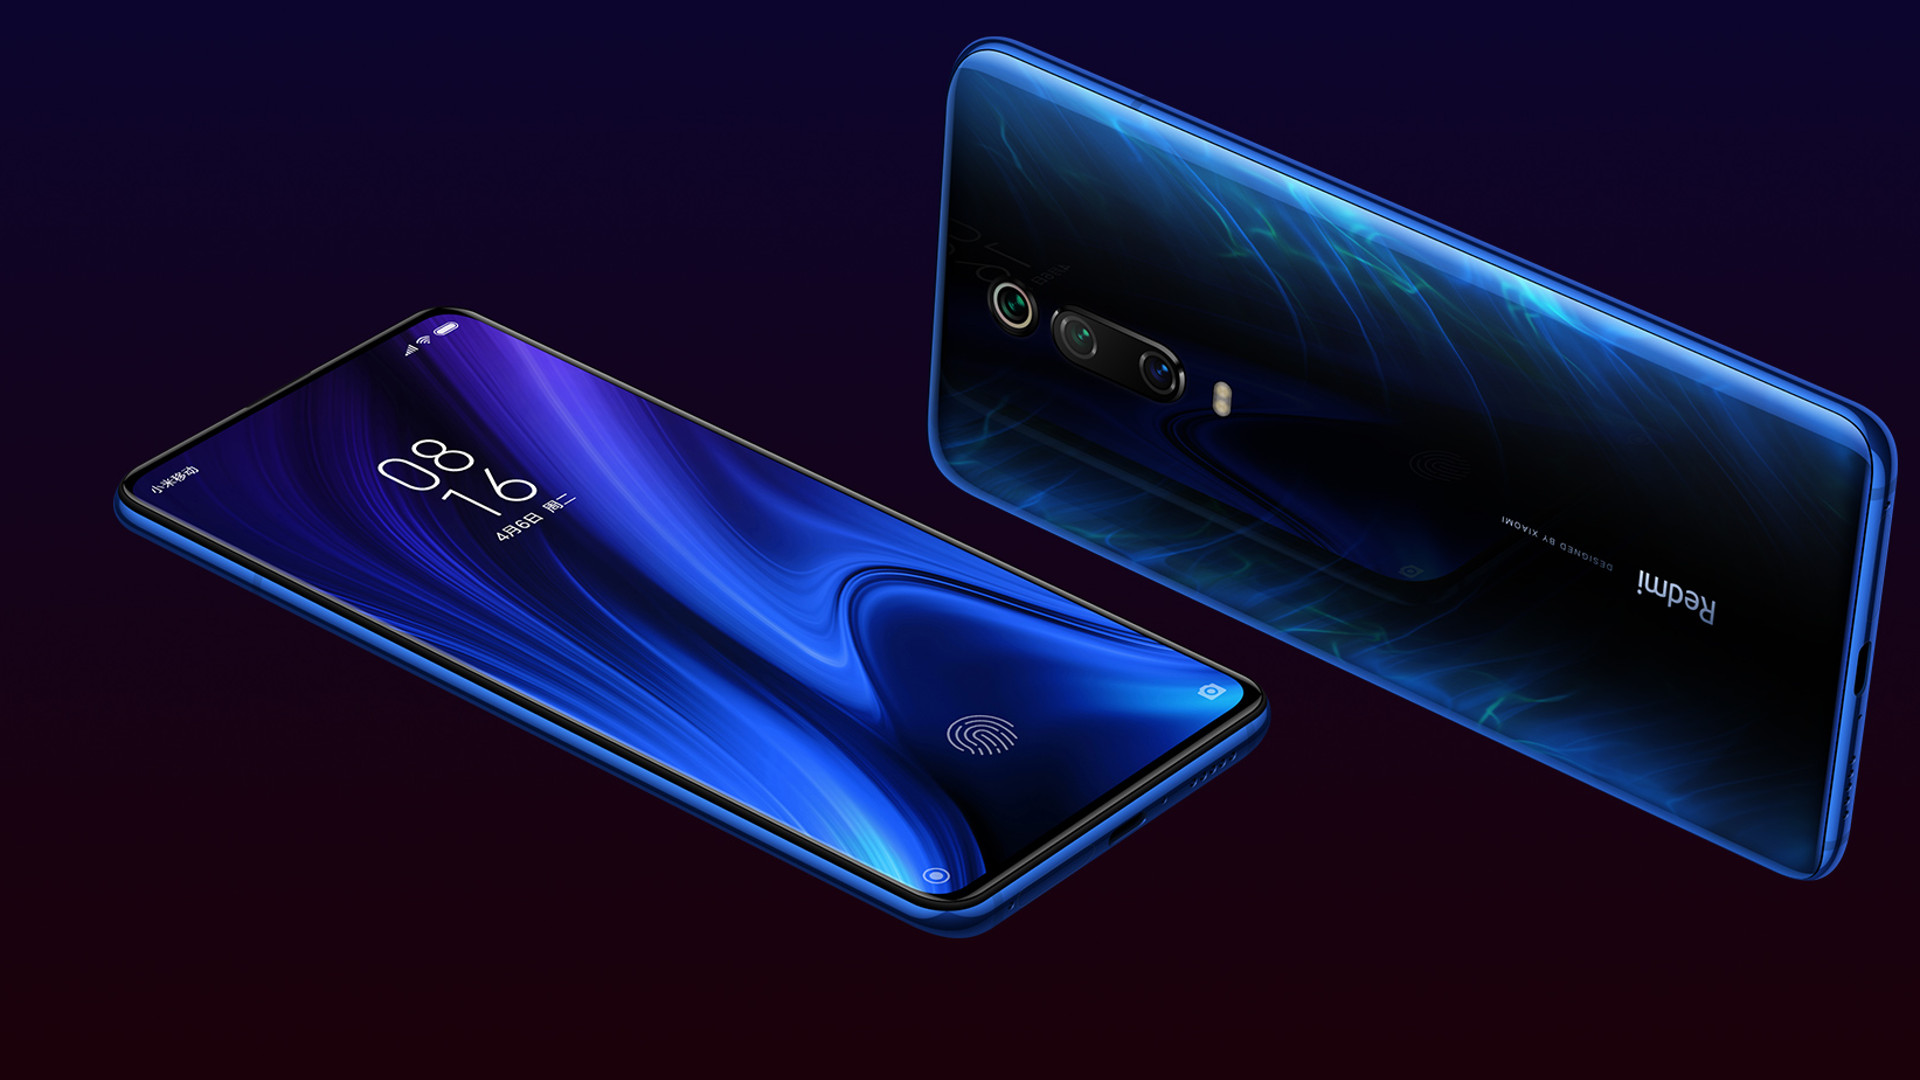 The Redmi K20 Pro is expected to be called the Xiaomi Mi 9T Pro in the West.